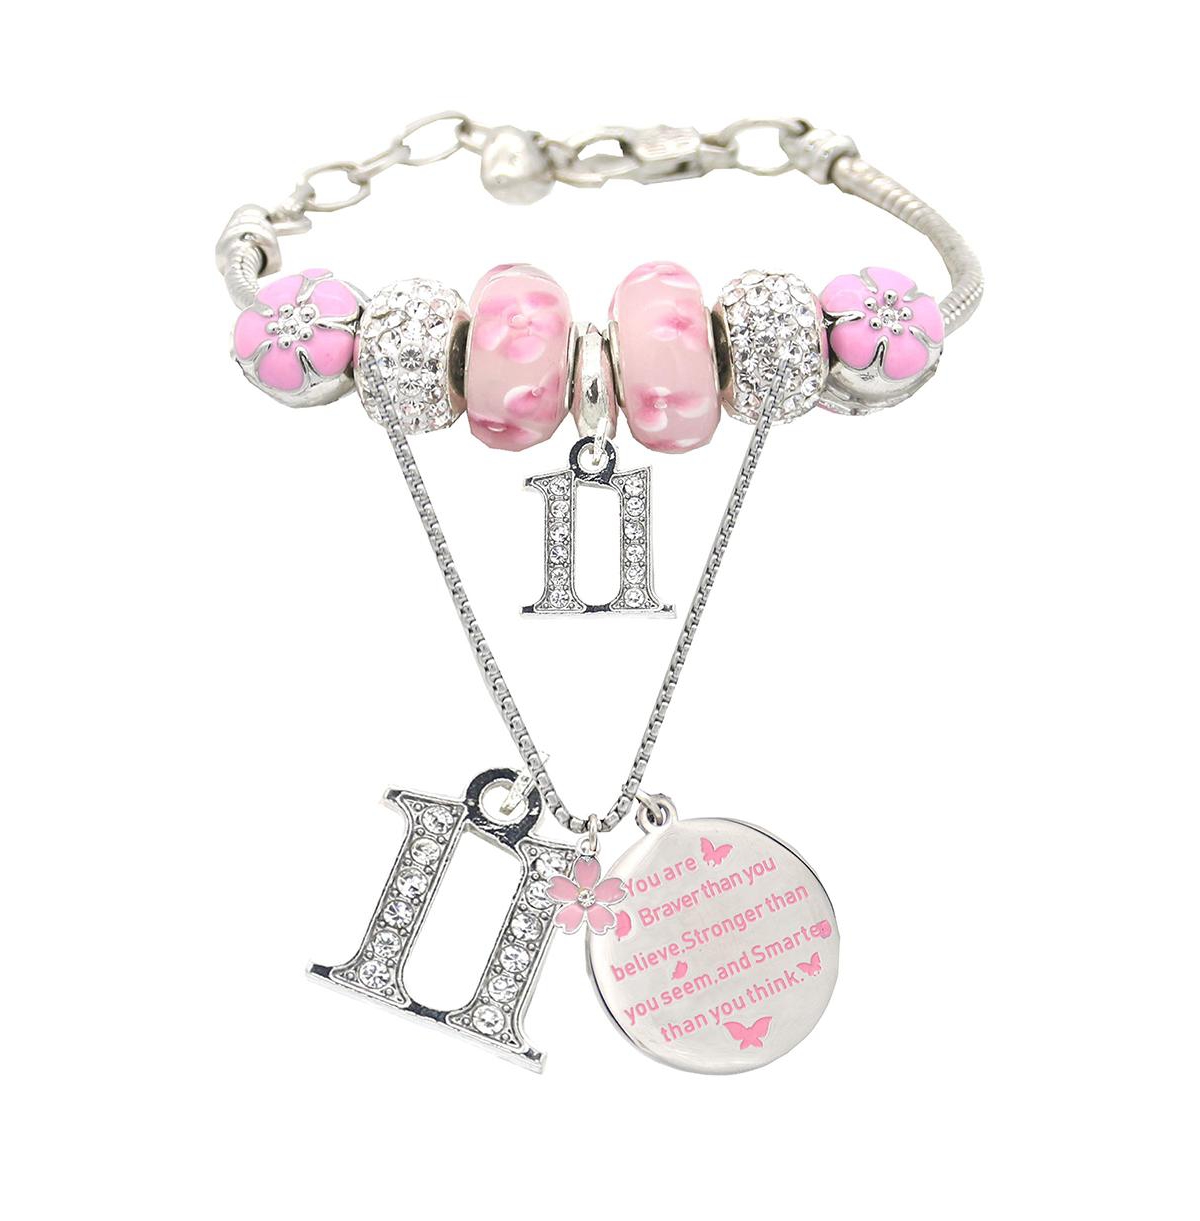 Girls' 11th Birthday Gift Set: Charm Bracelet, Necklace, Party Supplies, and Decorations - Celebrate Turning 11 Years Old with Stylish Jewelry - Open